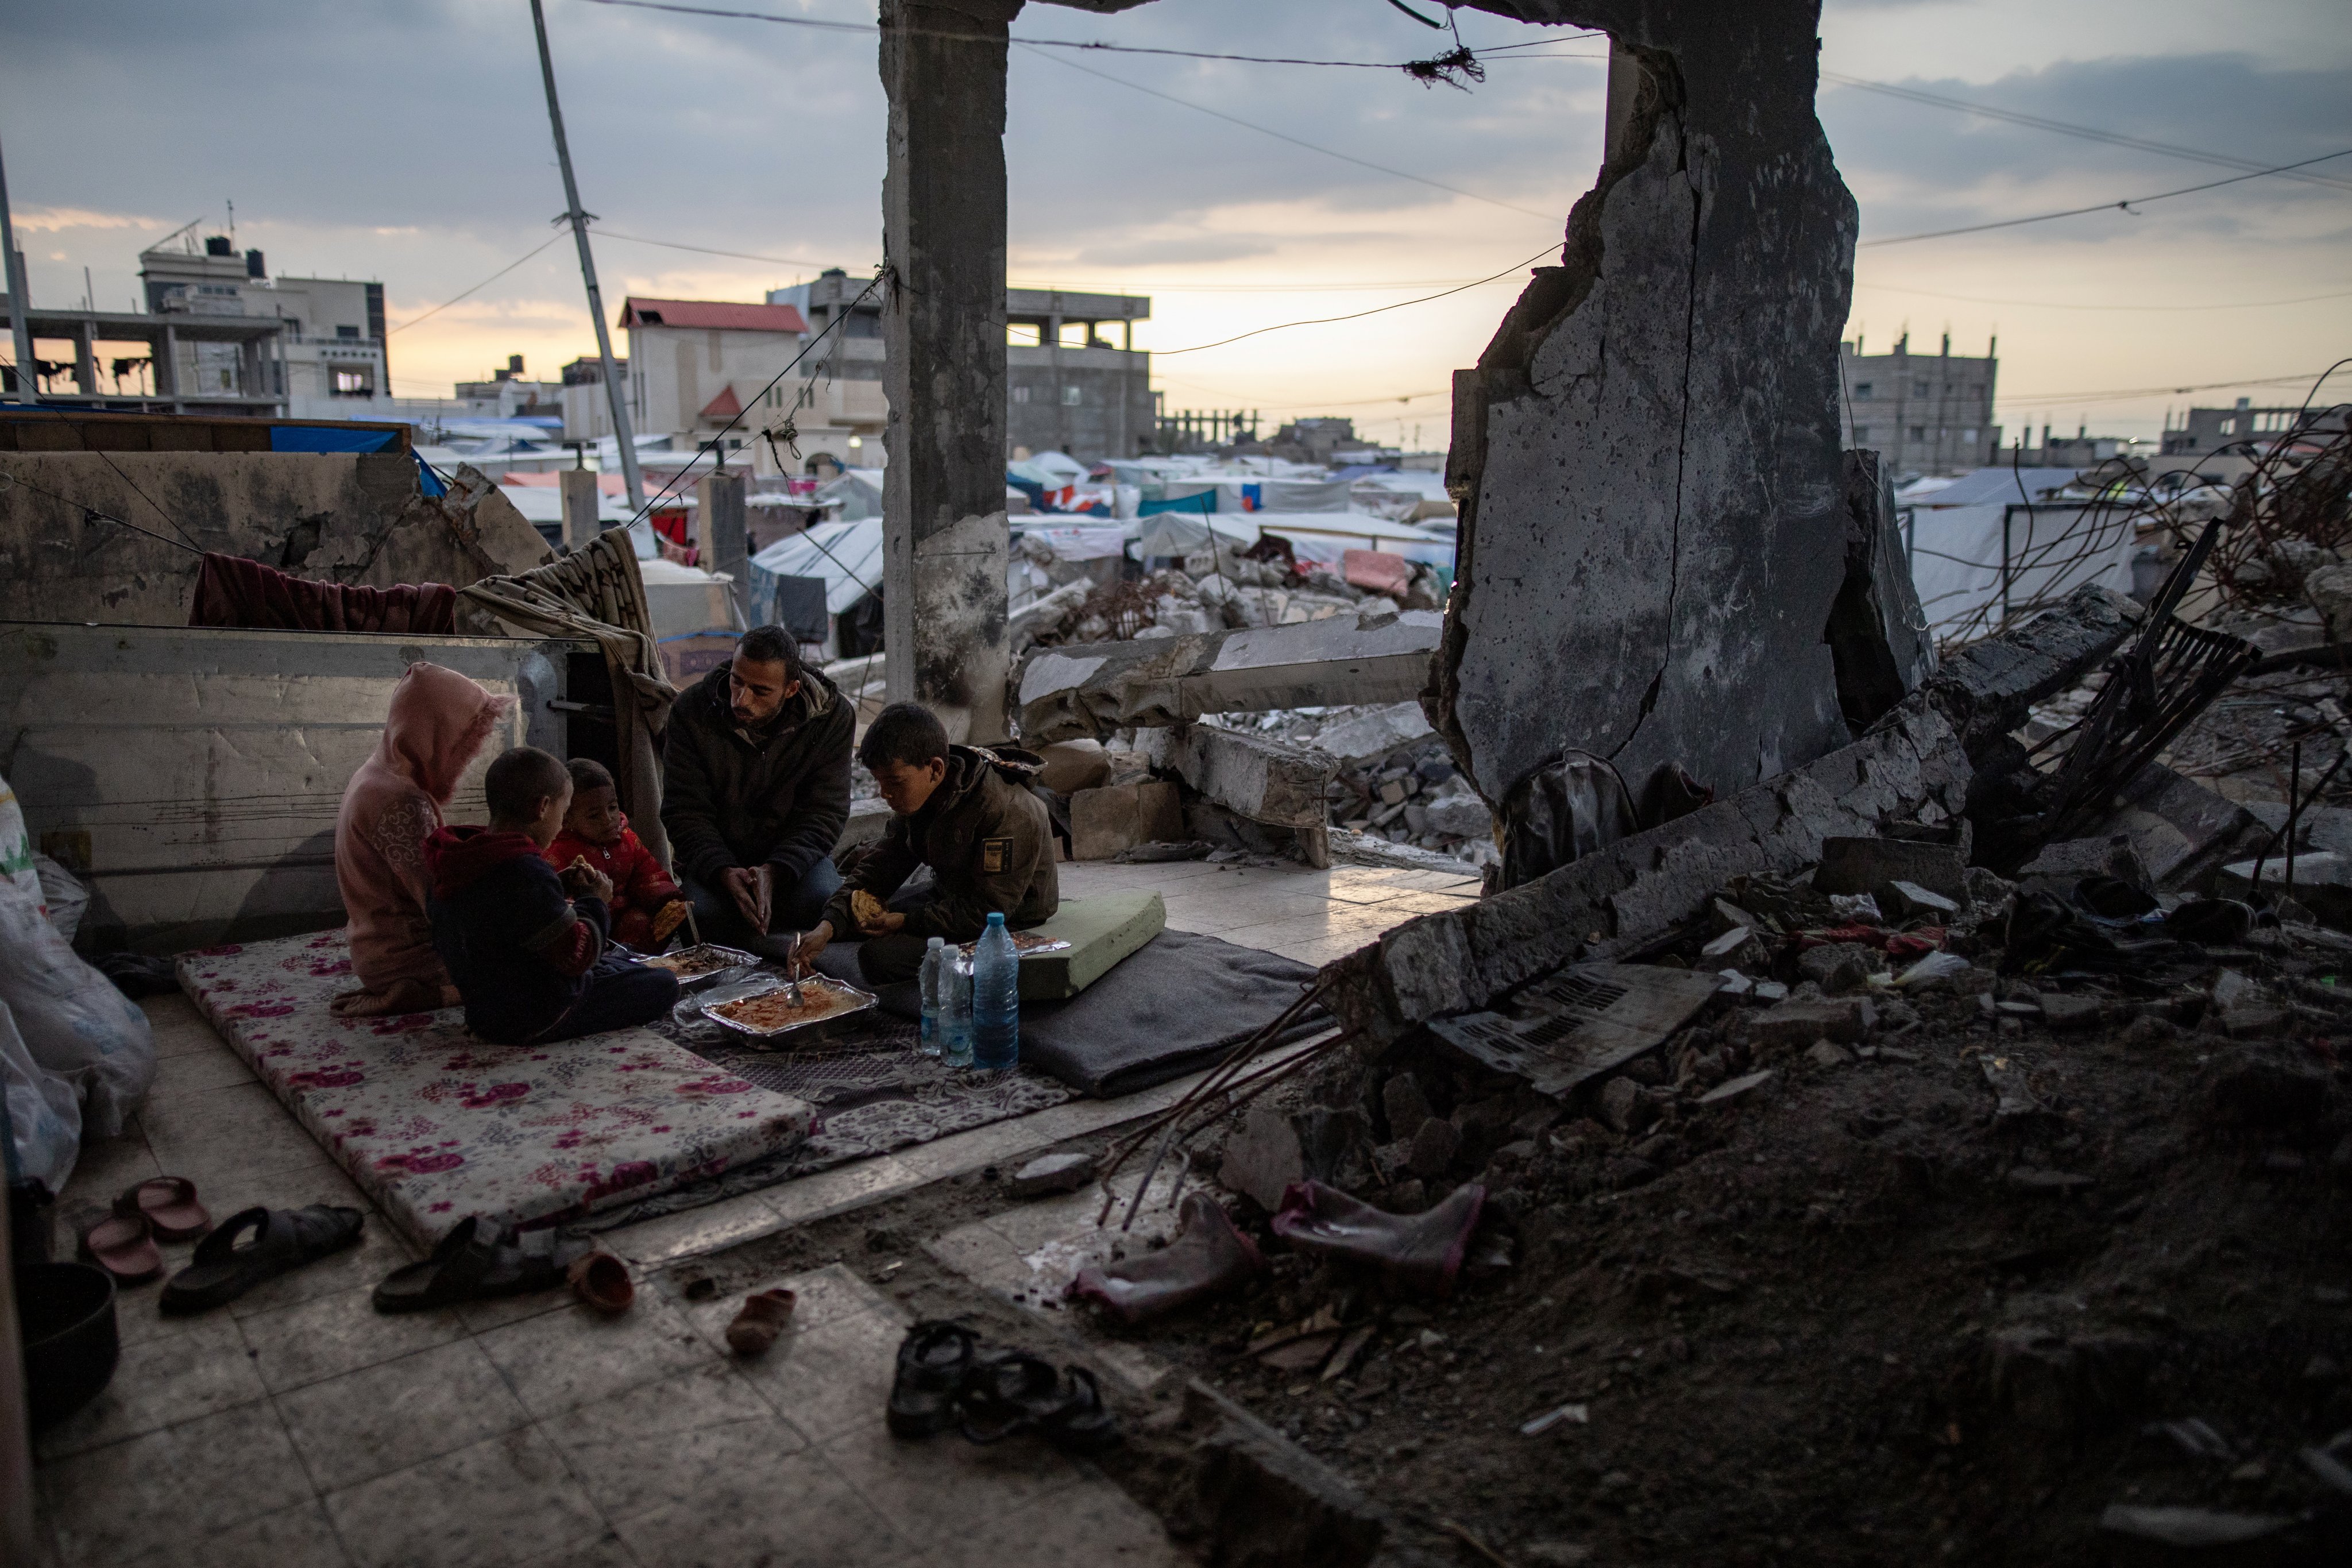 An internally displaced Palestinian family prepares for iftar, the fast-breaking evening meal during the Muslim holy month of Ramadan, in a destroyed house, in Rafah, in the southern Gaza Strip on March 19. Photo: EPA-EFE